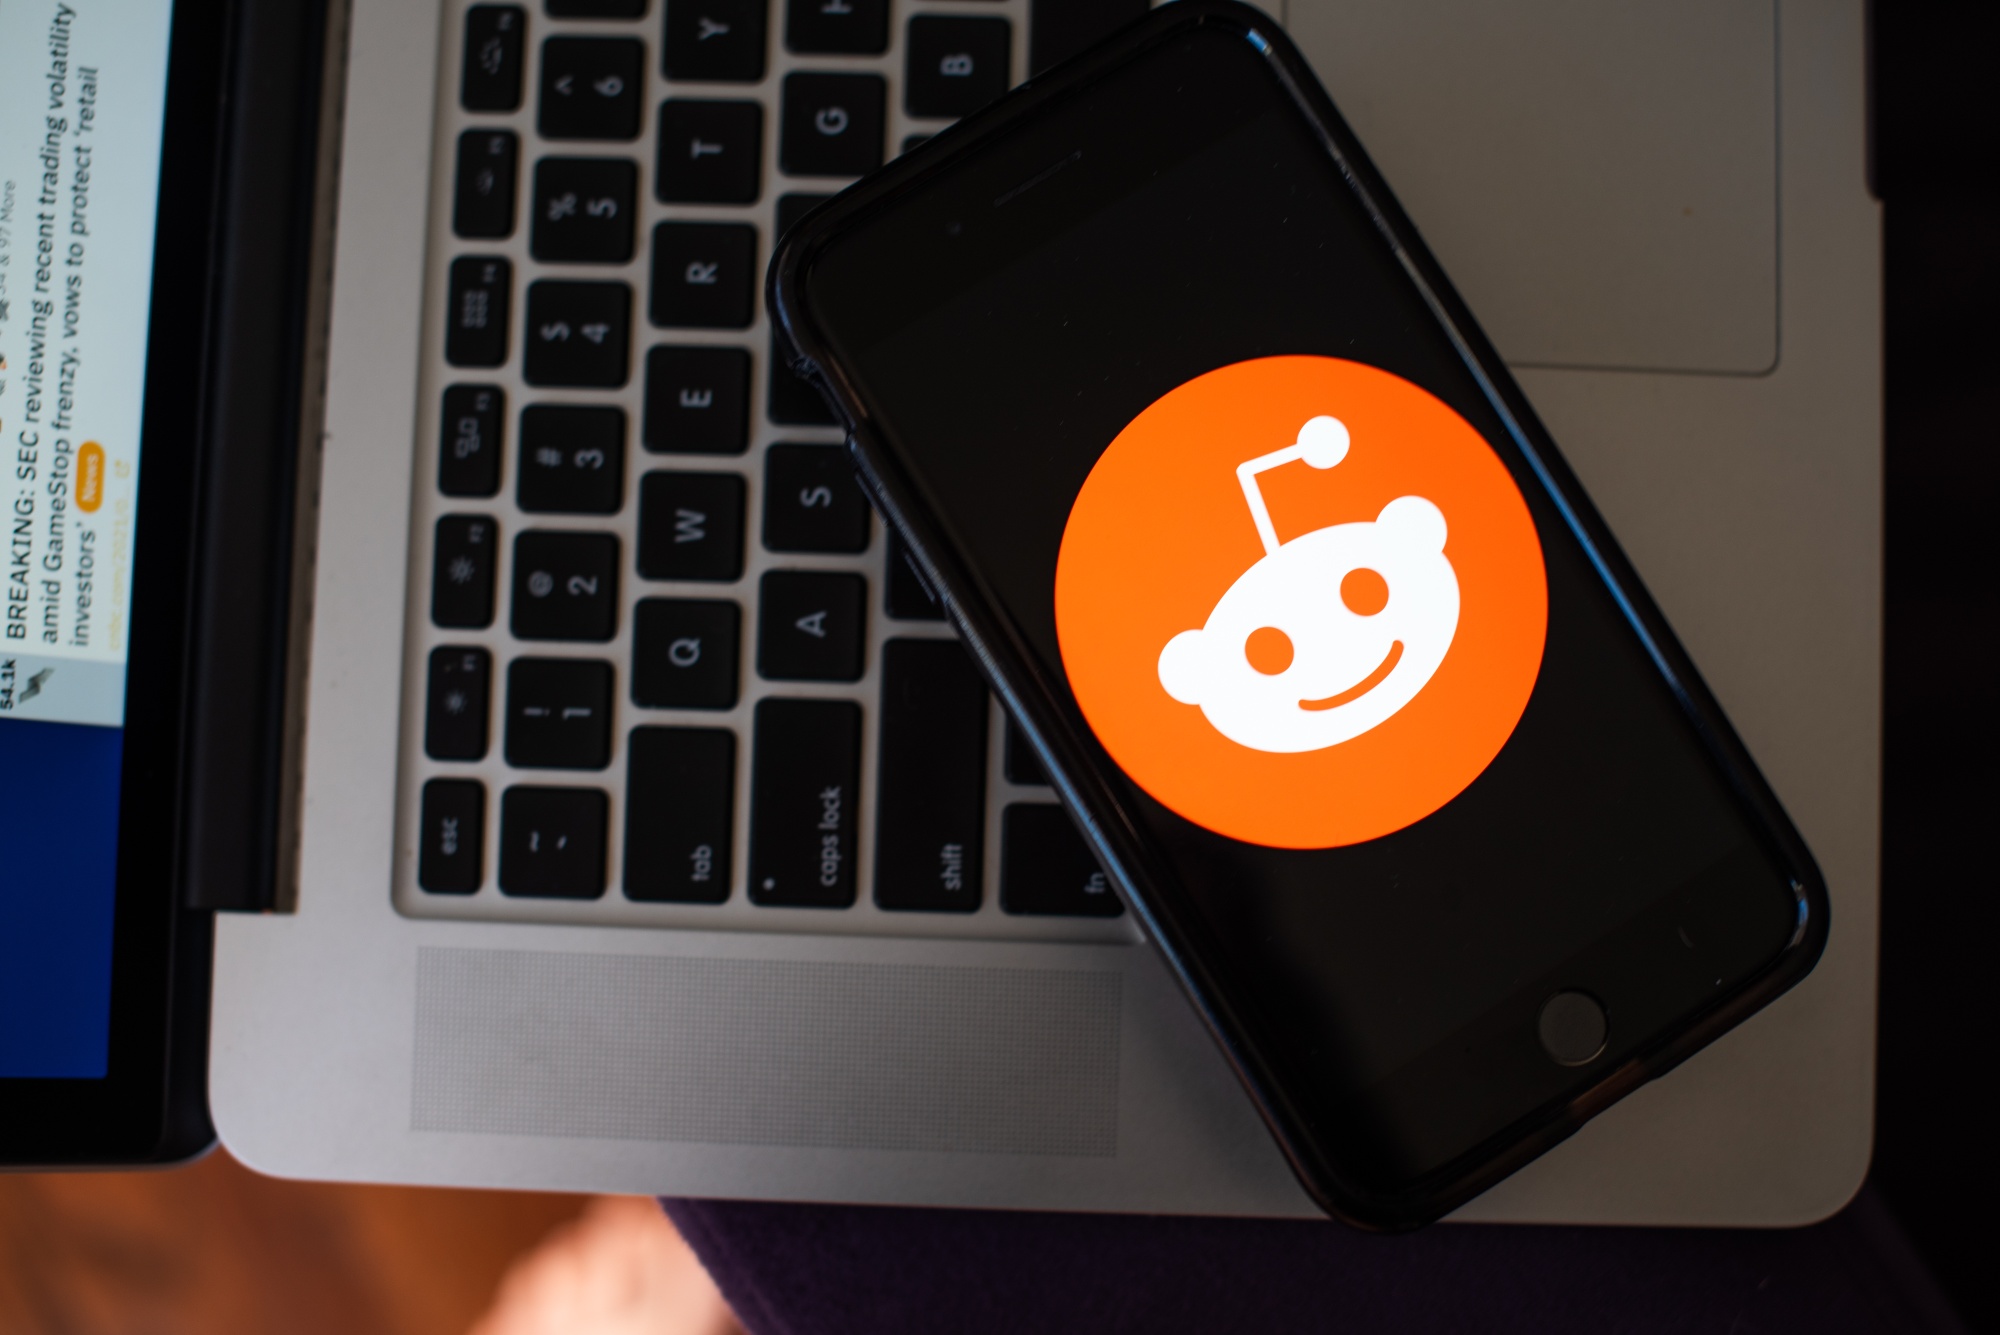 Reddit CEO Says WallStreetBets 'Well In Bounds' Of Its Policy